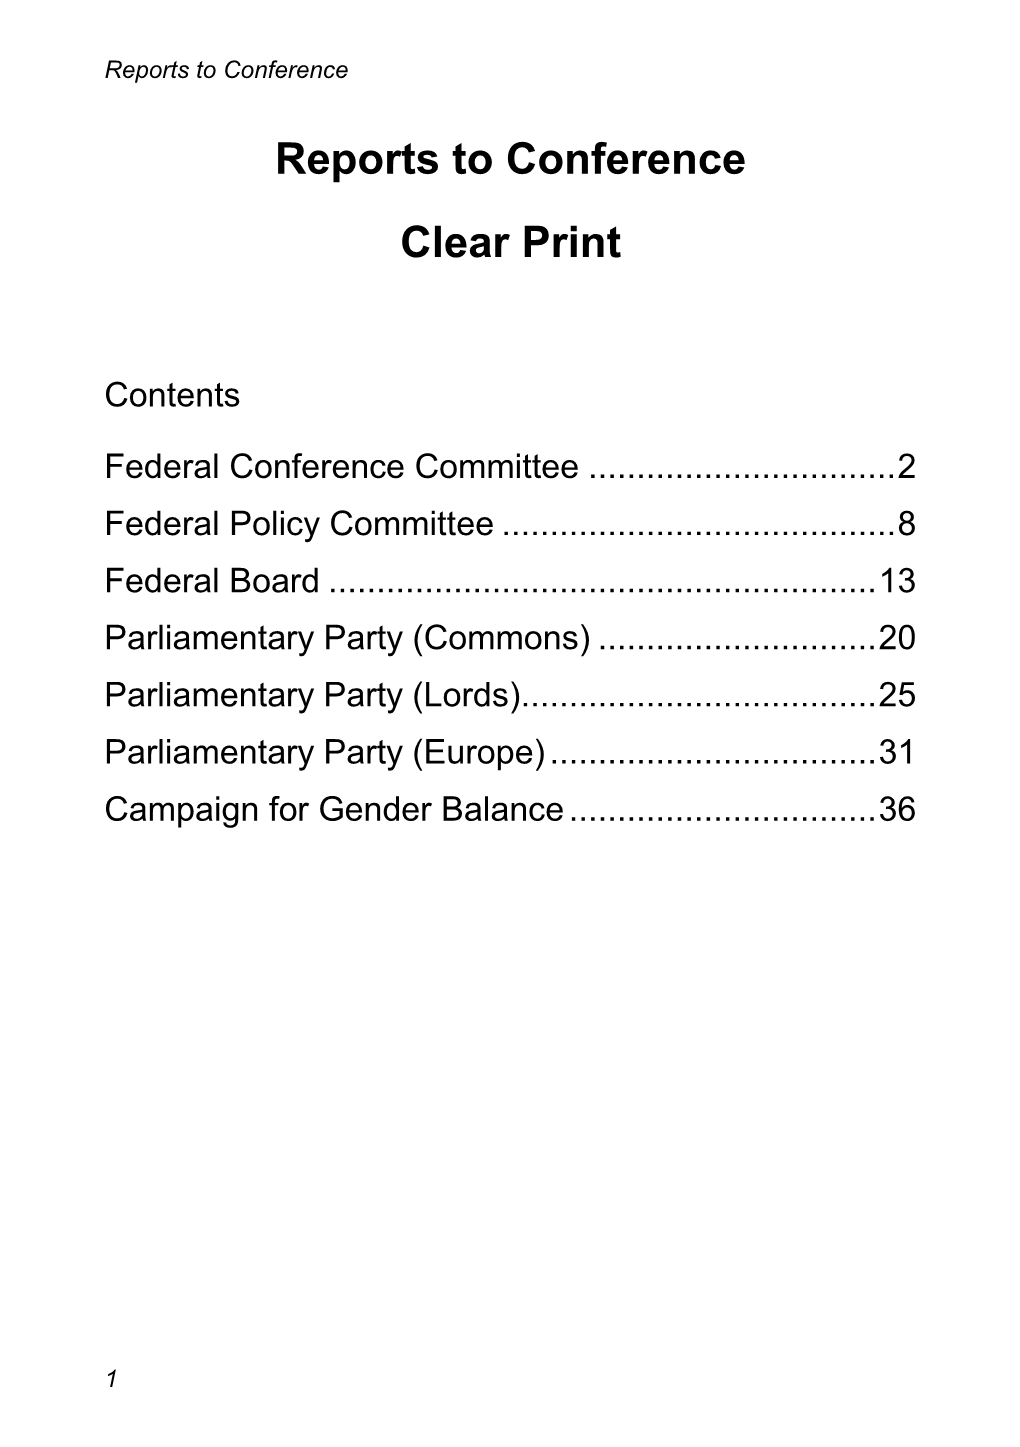 Reports to Conference Clear Print